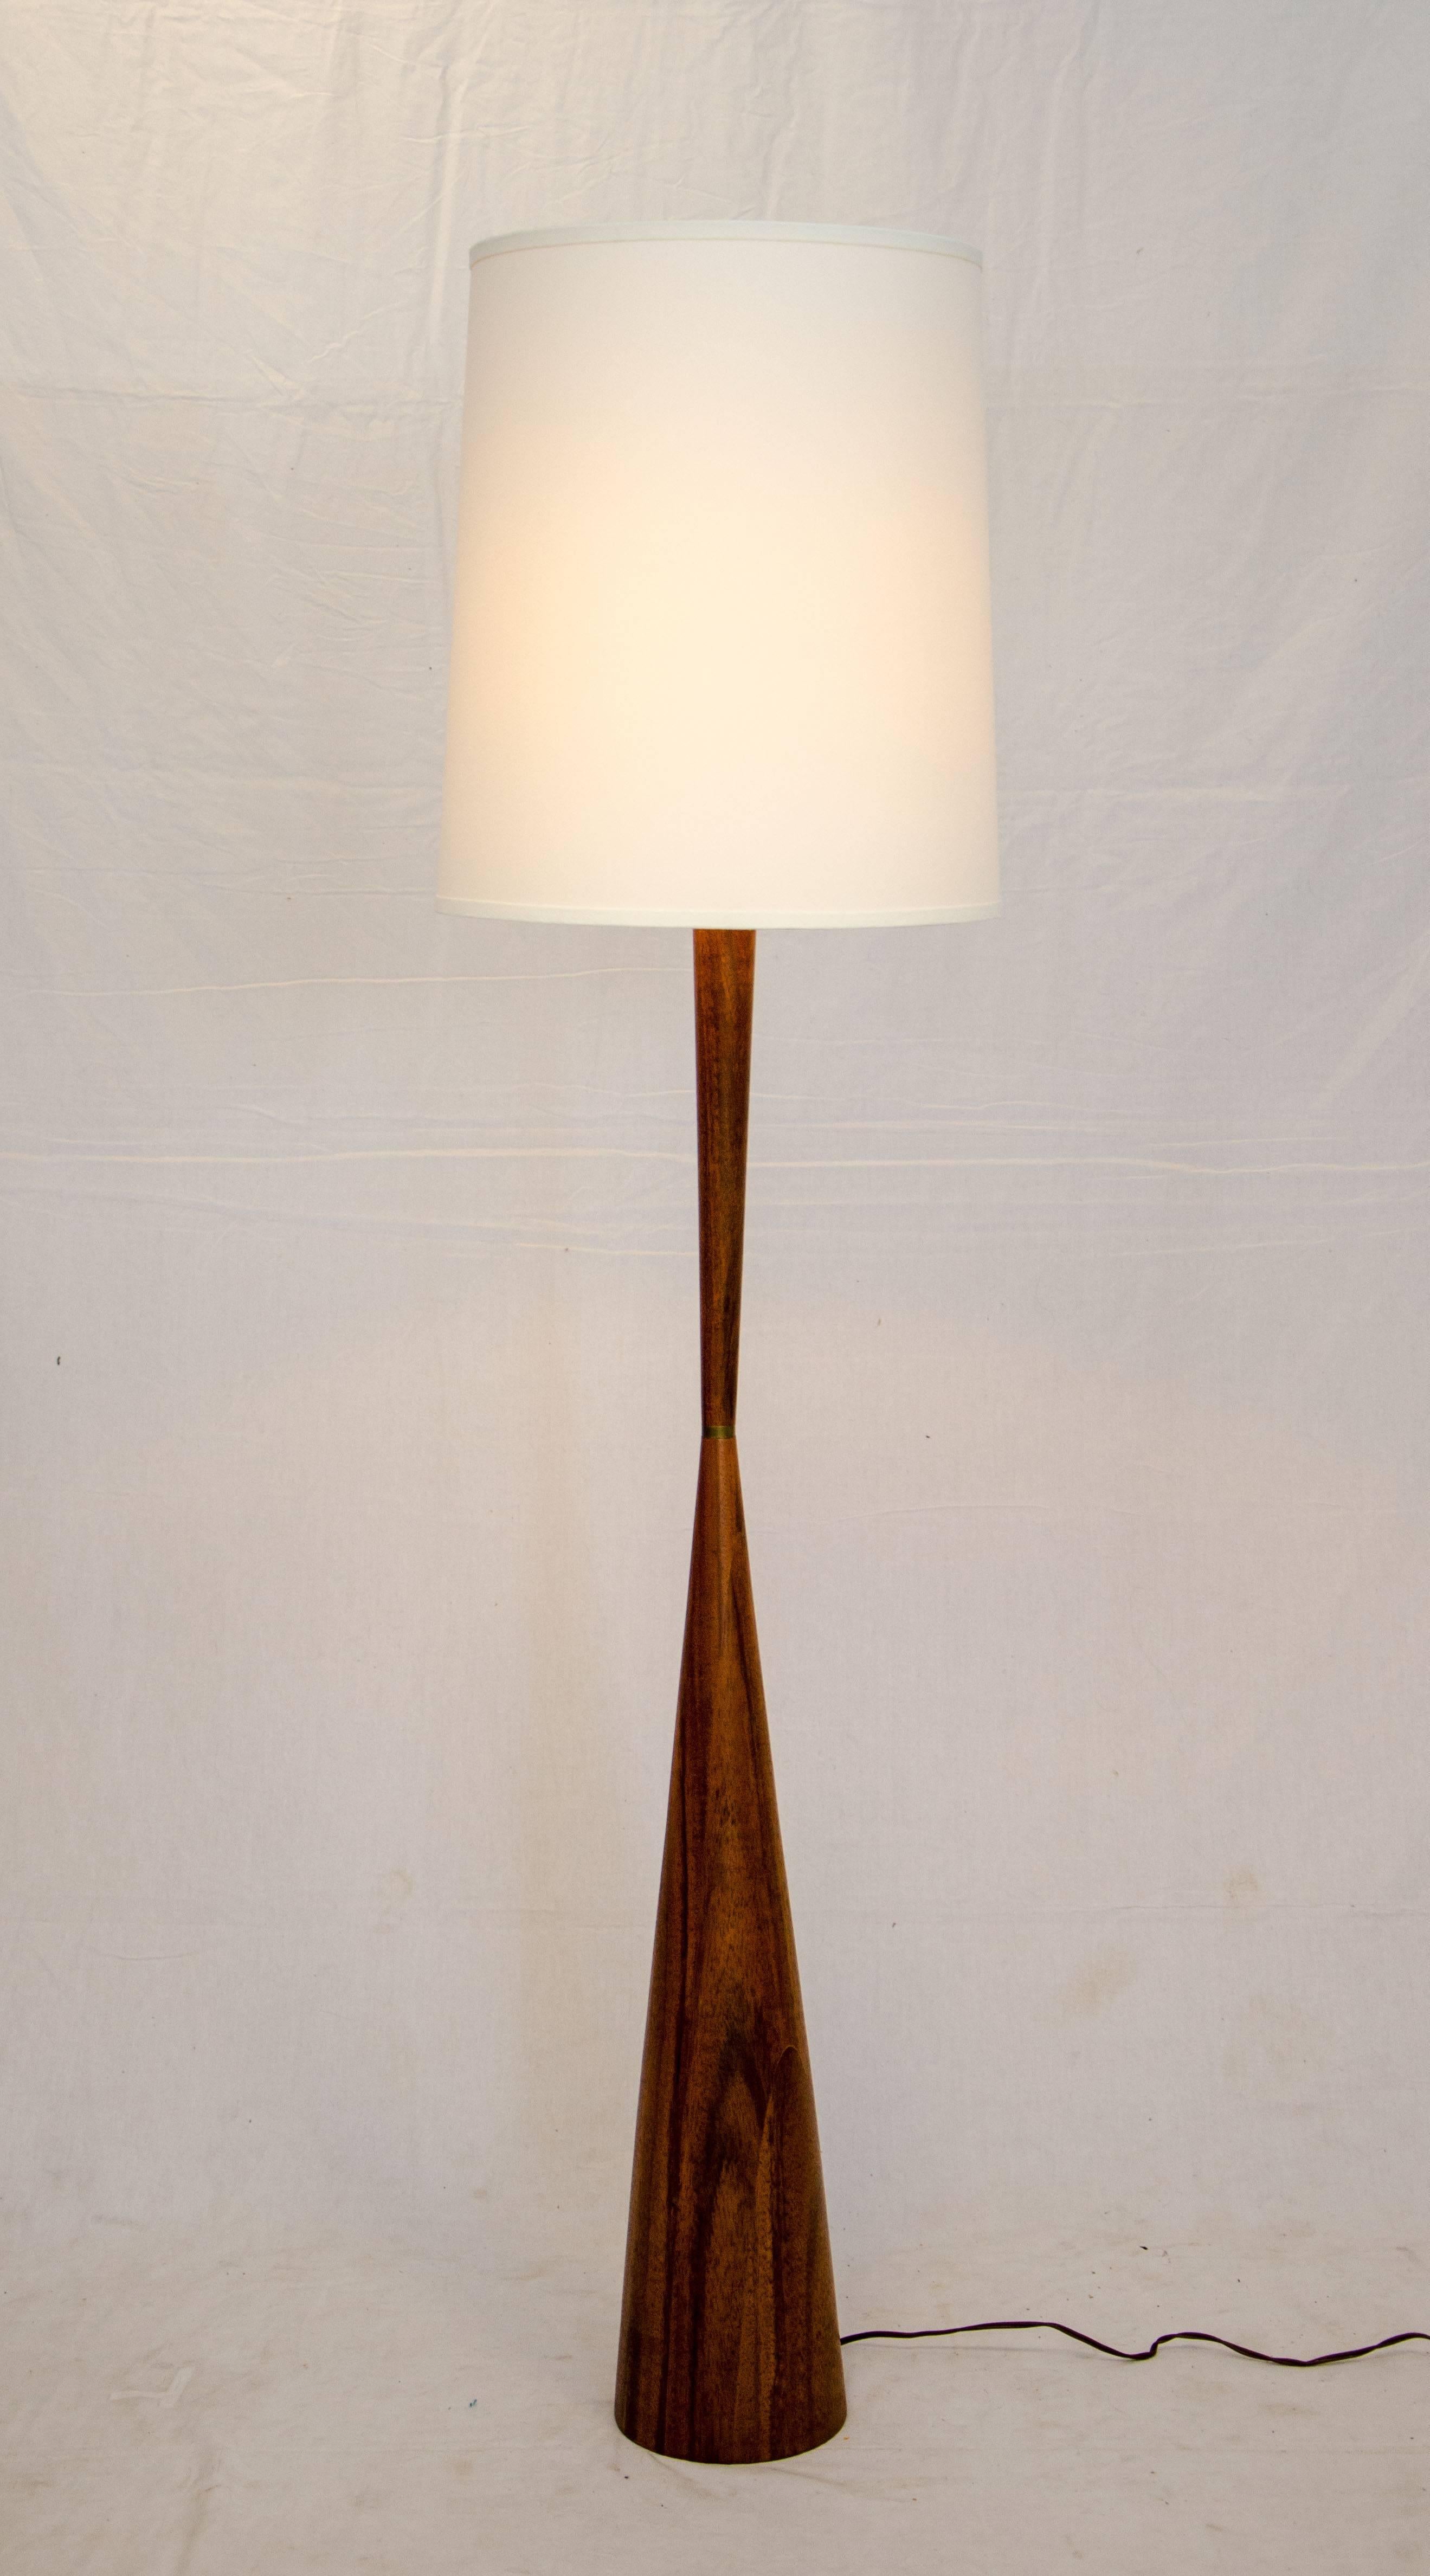 Very nice Mid-Century mahogany floor lamp. The base is cone shaped and tapers to a thinner centre with a brass accent, the taper then widens a bit as it goes up to the socket.
The shade is 18